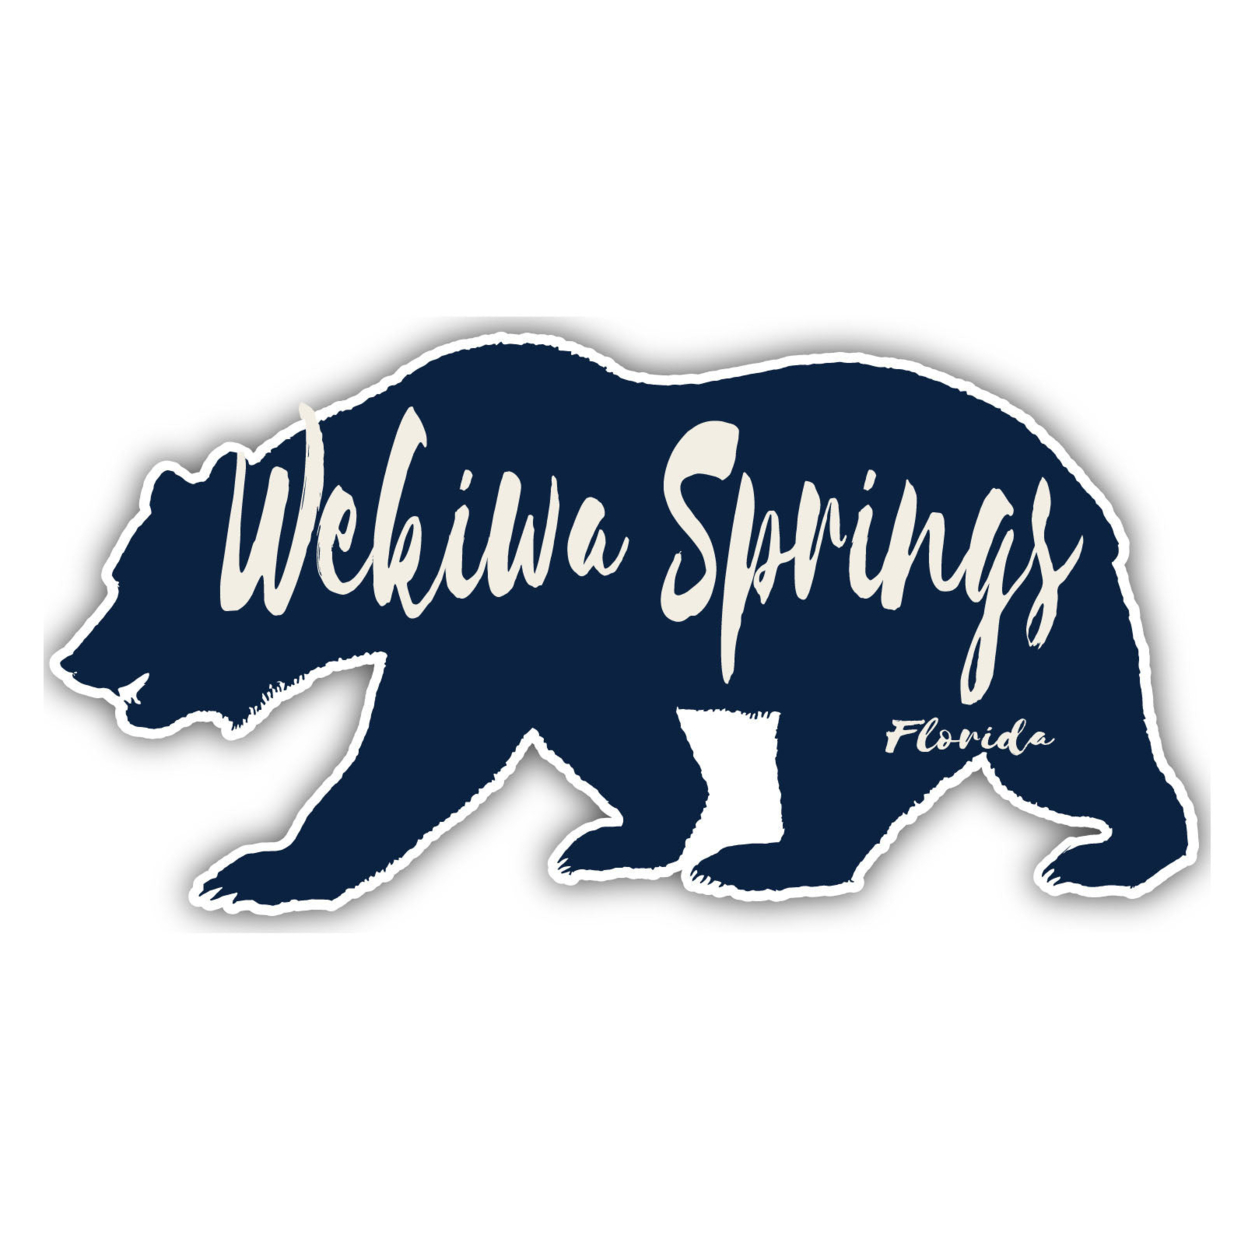 Wekiwa Springs Florida Souvenir Decorative Stickers (Choose Theme And Size) - Single Unit, 4-Inch, Great Outdoors